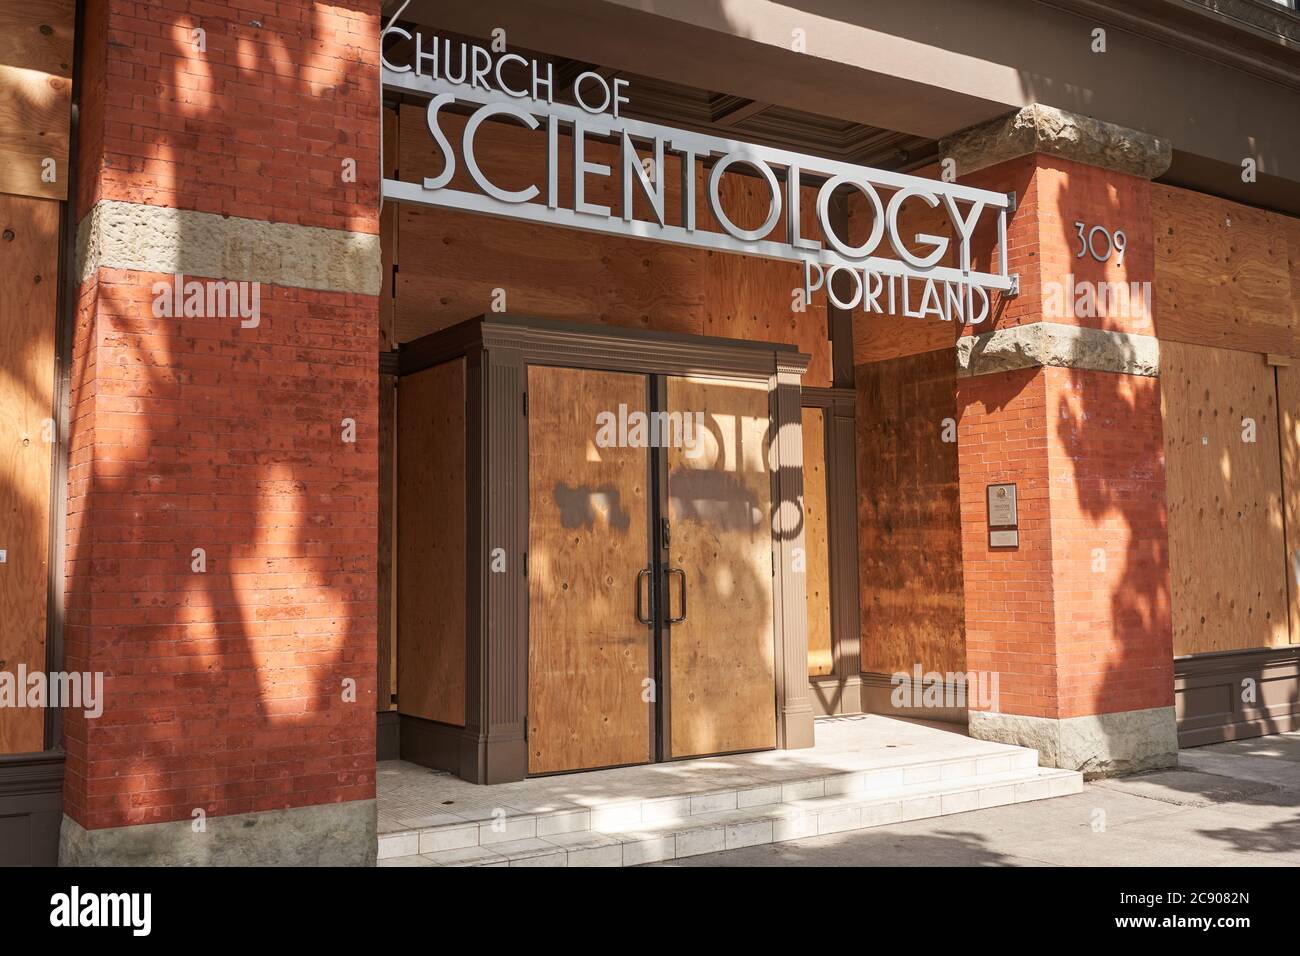 The boarded up Church of Scientology in downtown Portland, Oregon, amid the ongoing BLM protest, seen on Saturday, July 11, 2020. Stock Photo